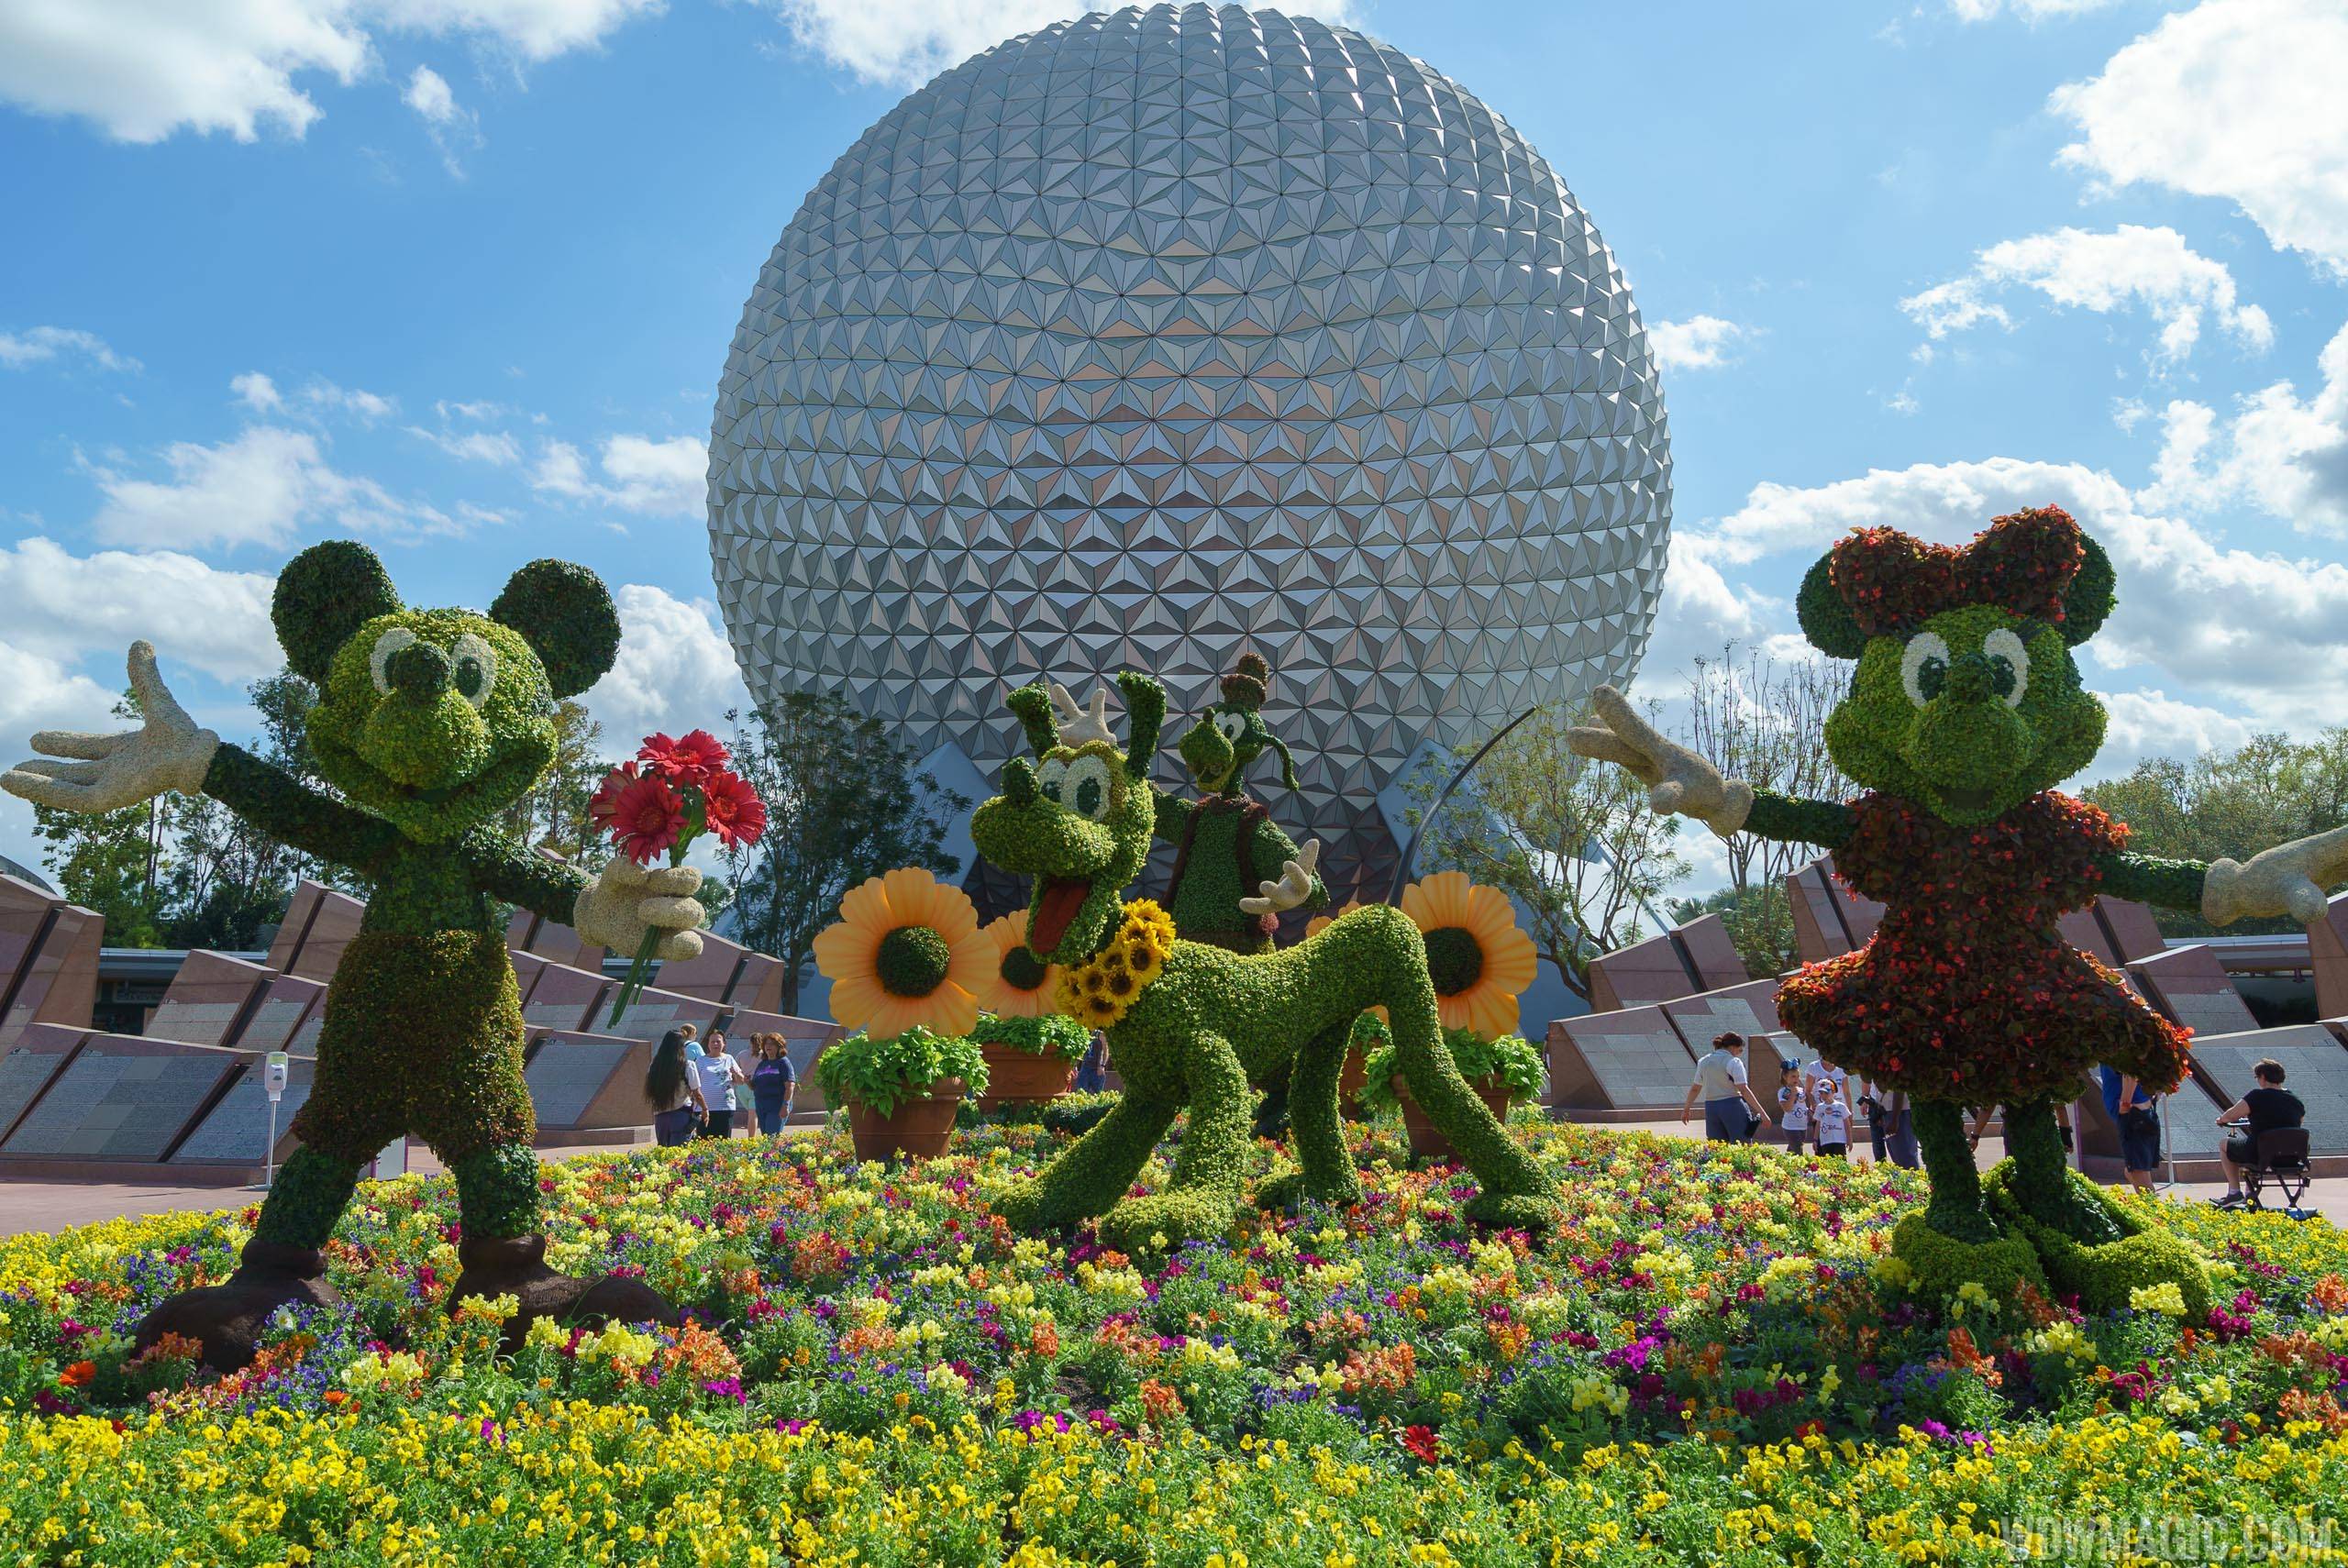 Garden Rocks Concert Series is included with admission to EPCOT